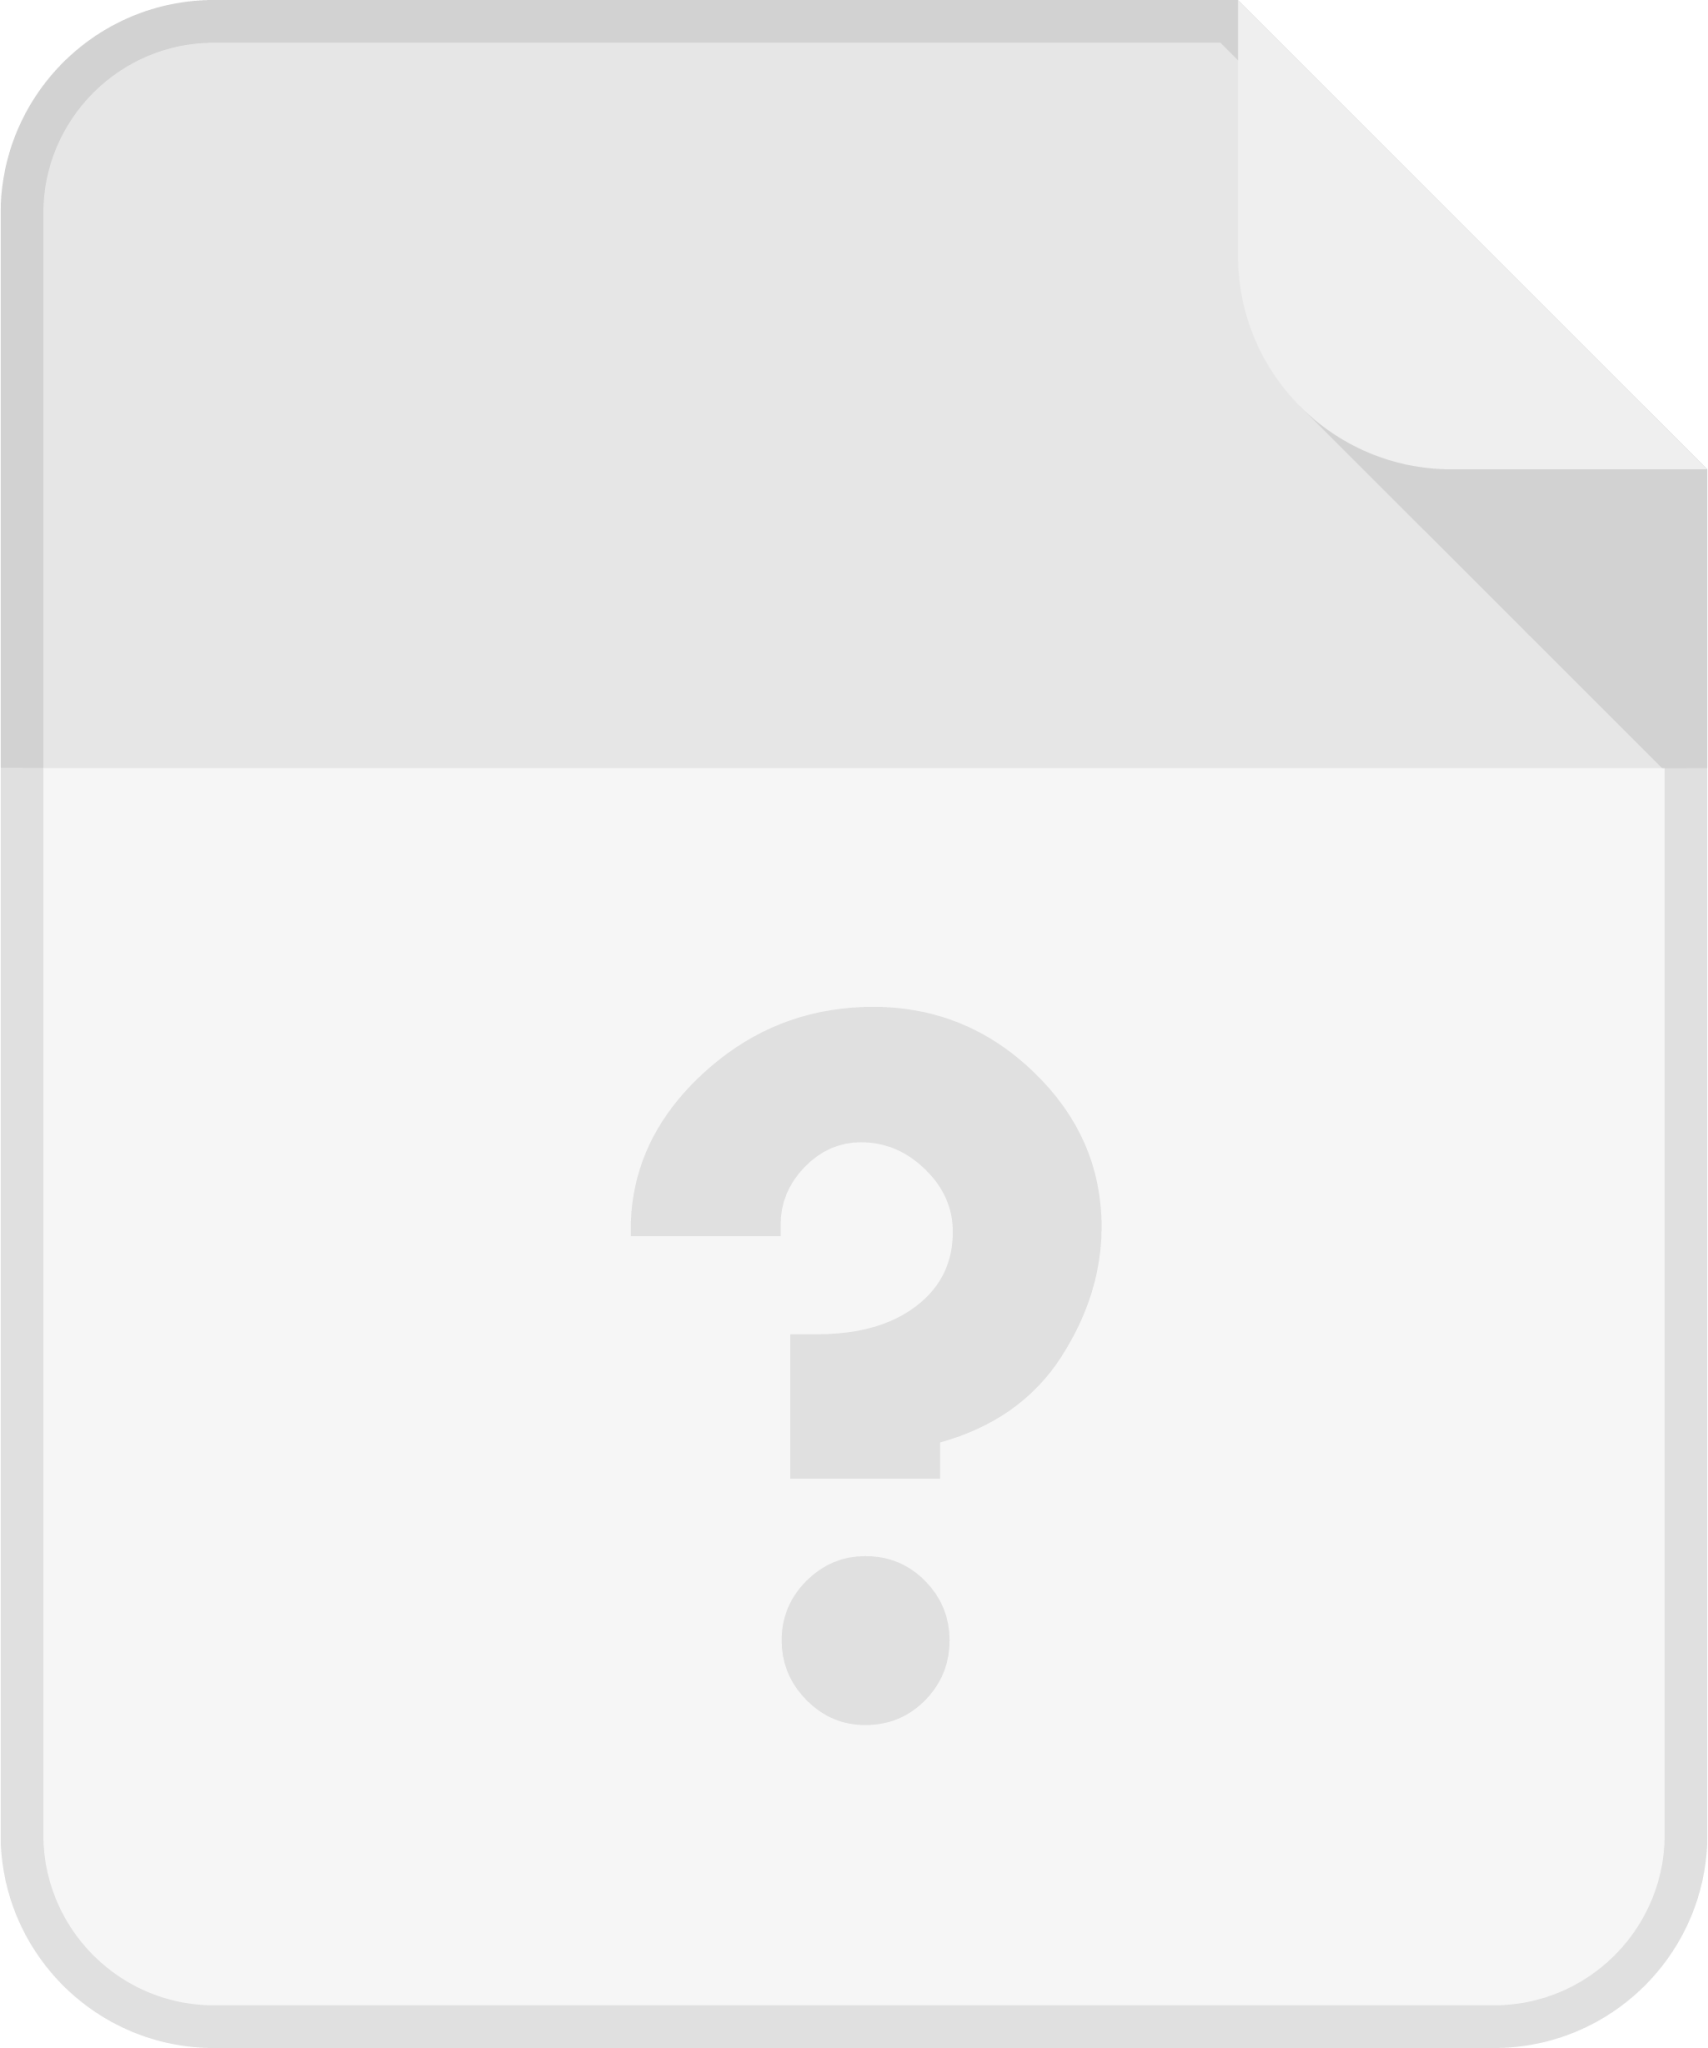 file type unknown question mark icon